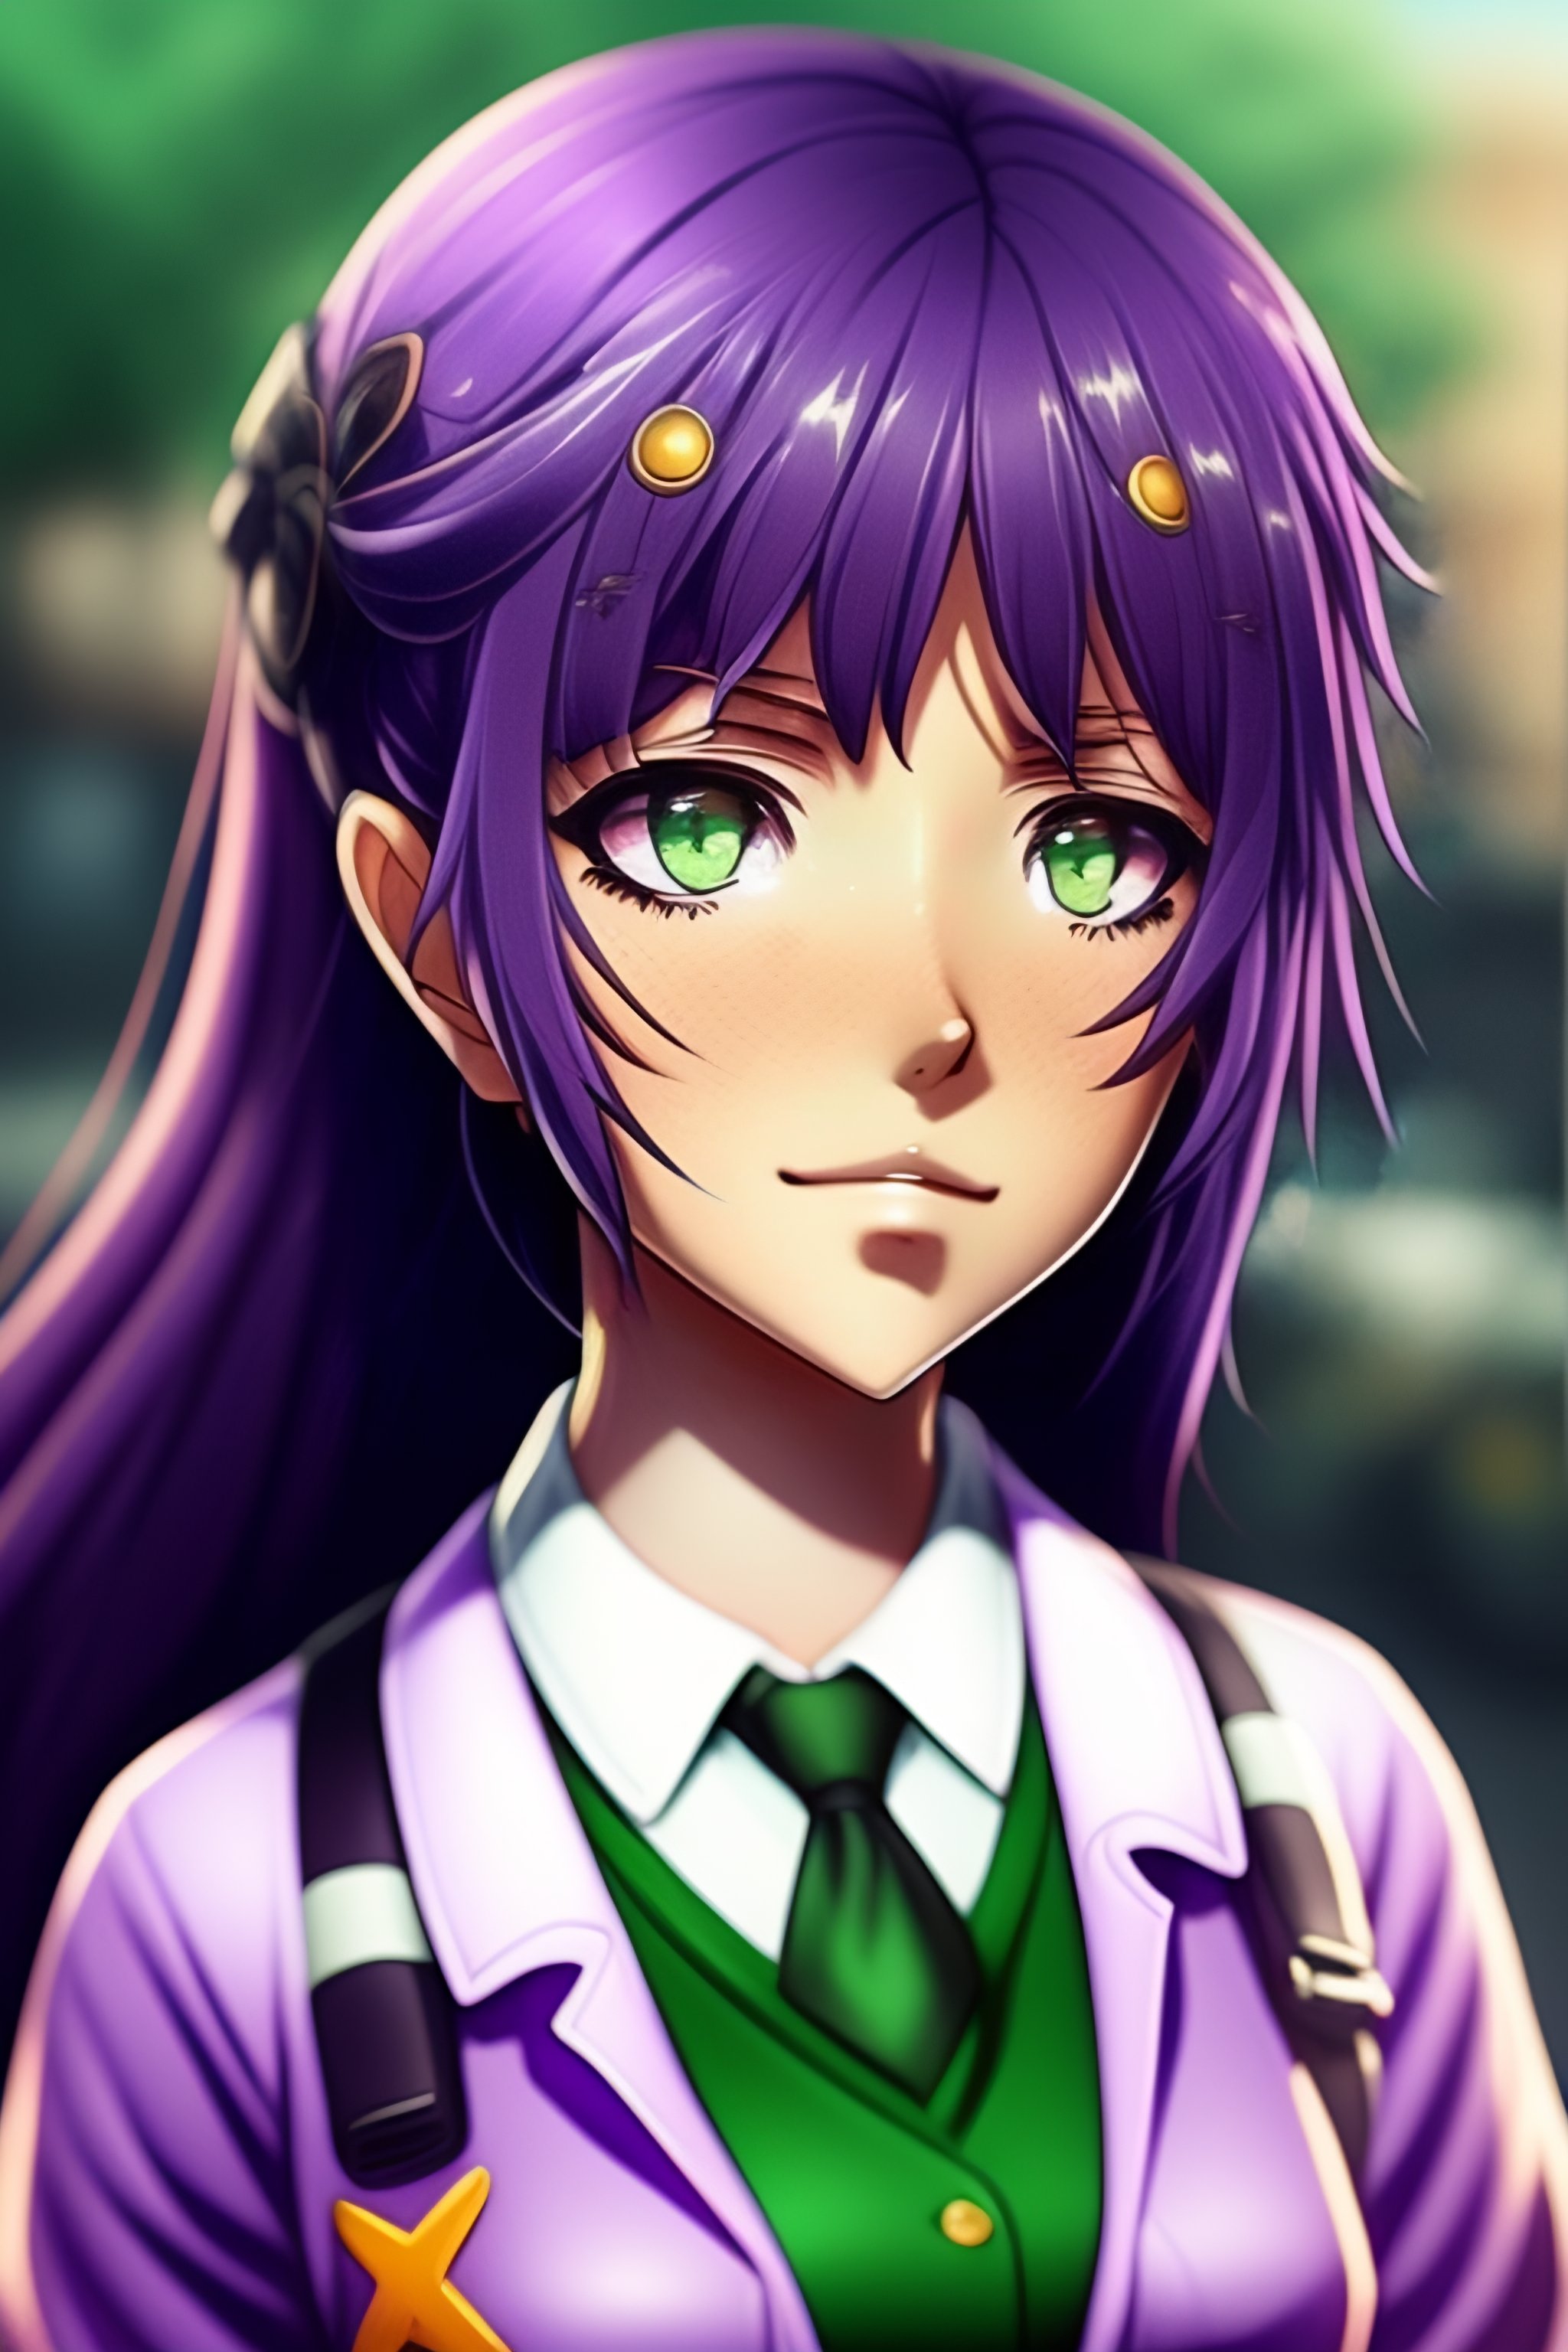 Lexica Schoolgirl With Purple Hair Green Eyes In School Clothes Manga Style 